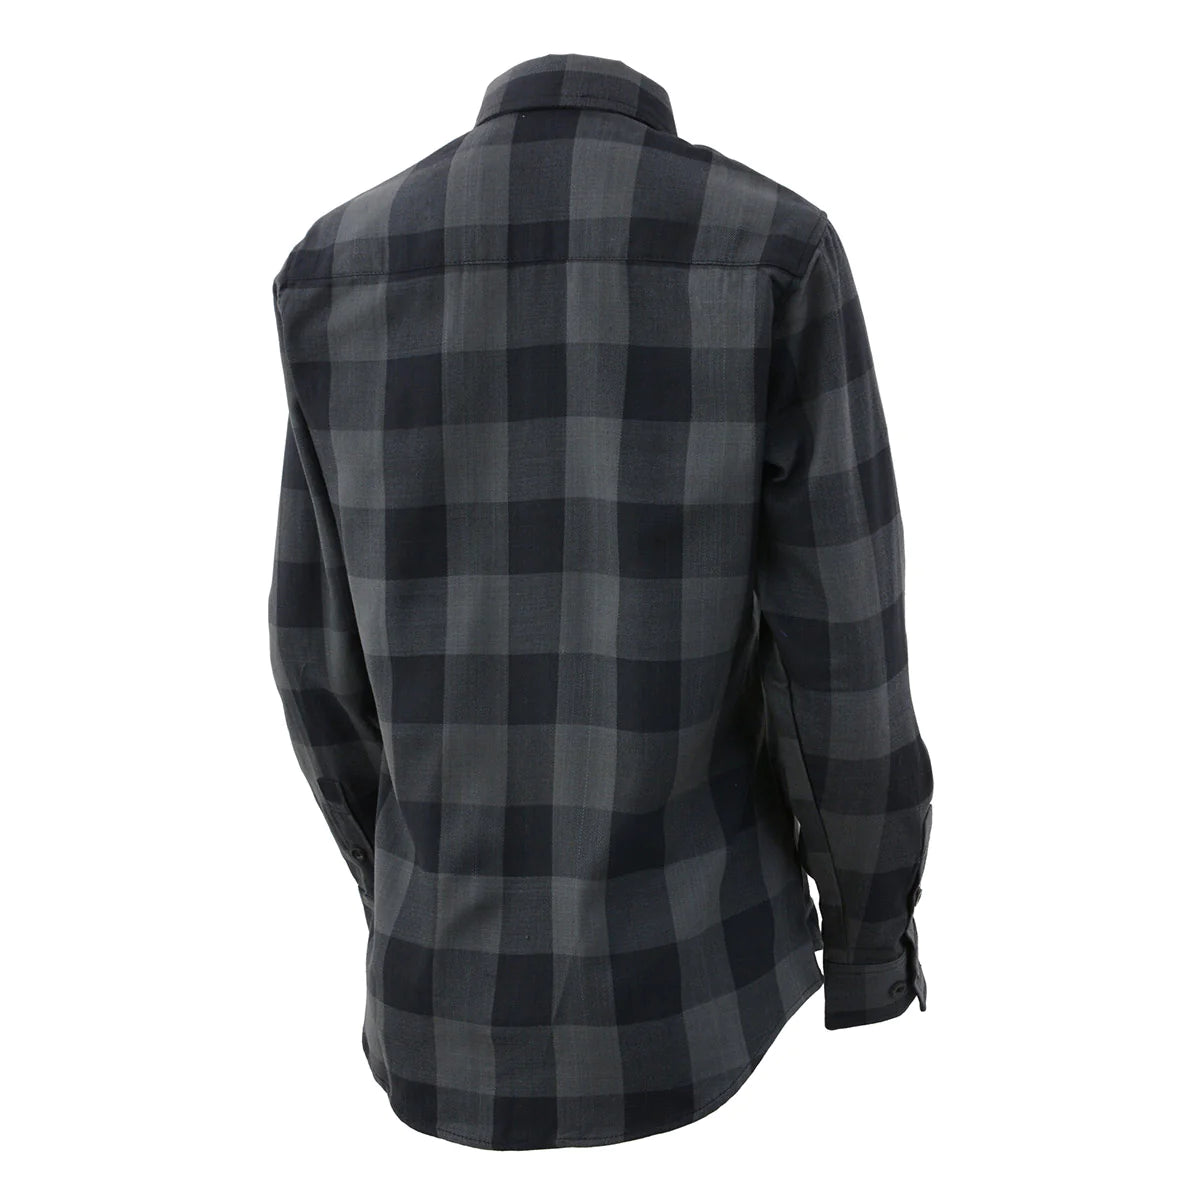 Women's Casual Dark Gray and Black Long Sleeve Cotton Casual Flannel Shirt